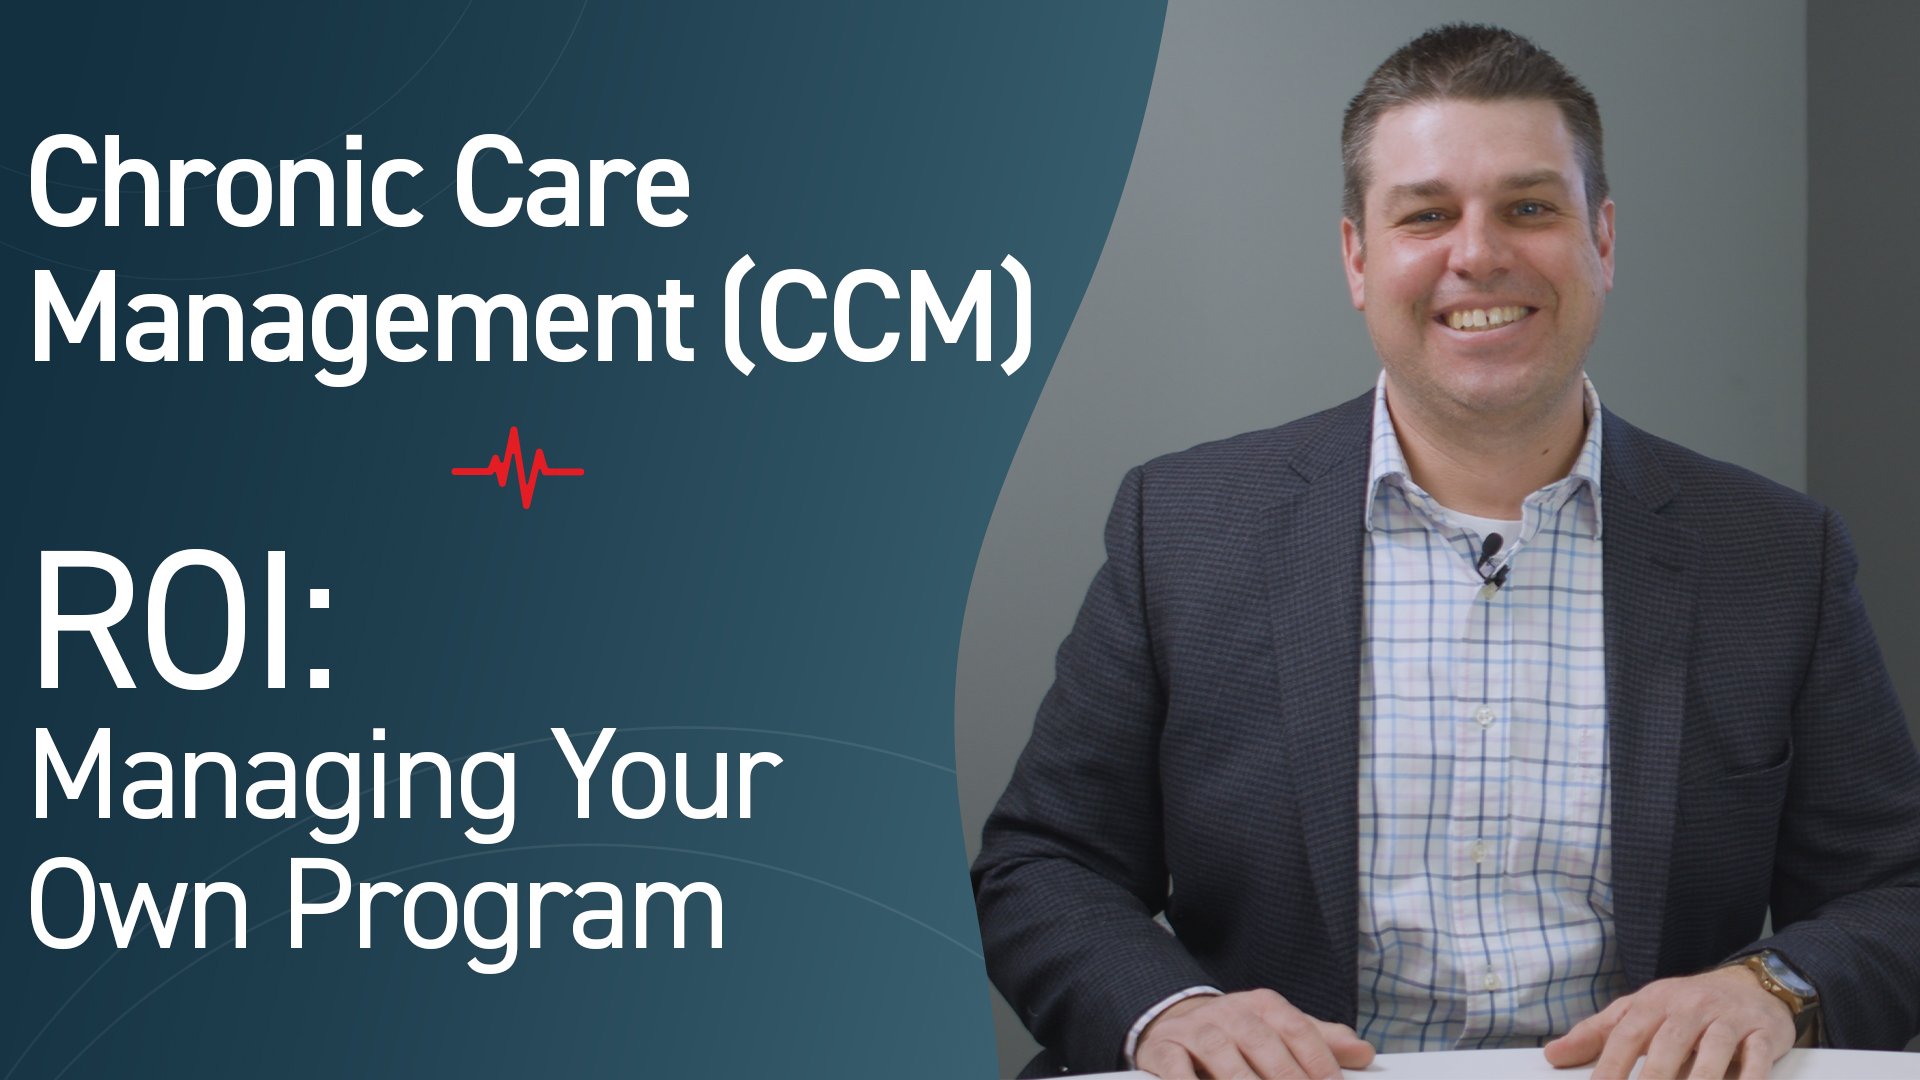 What is the ROI of a Chronic Care Management Program?